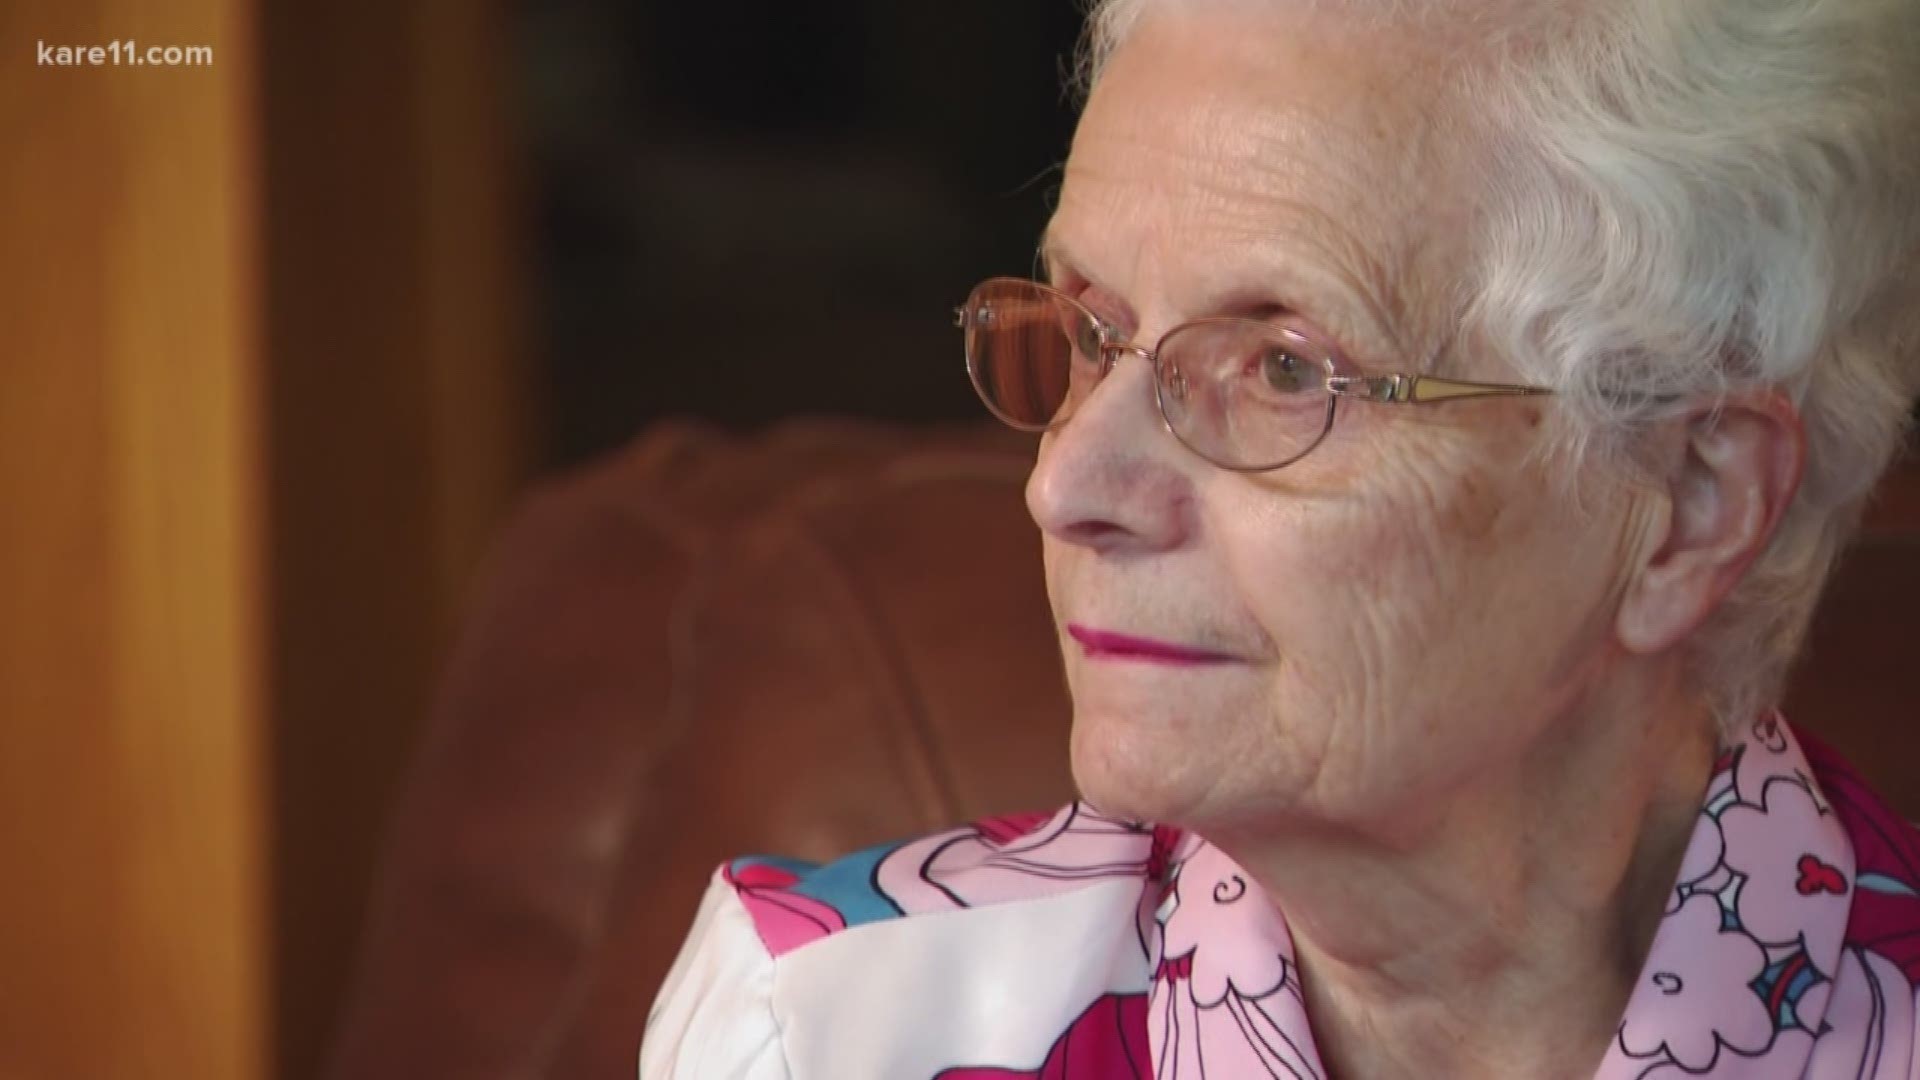 The scammers called when Kitty Hansen was at her most vulnerable, two days after the death of her husband. They ended up draining her bank account of $100,000. https://kare11.tv/2MGOGJm